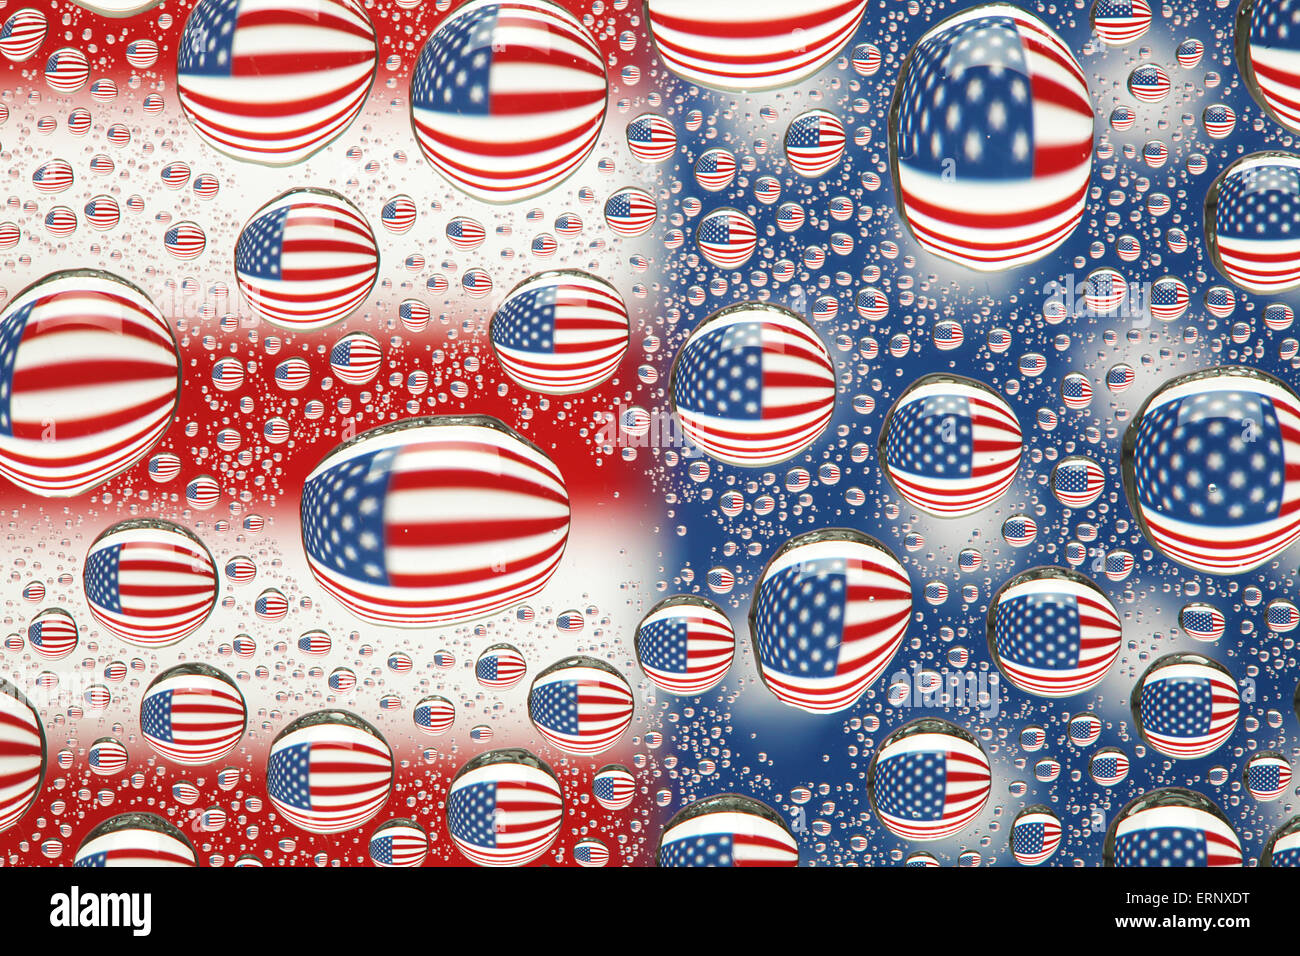 American flag reflected in water drops background Stock Photo